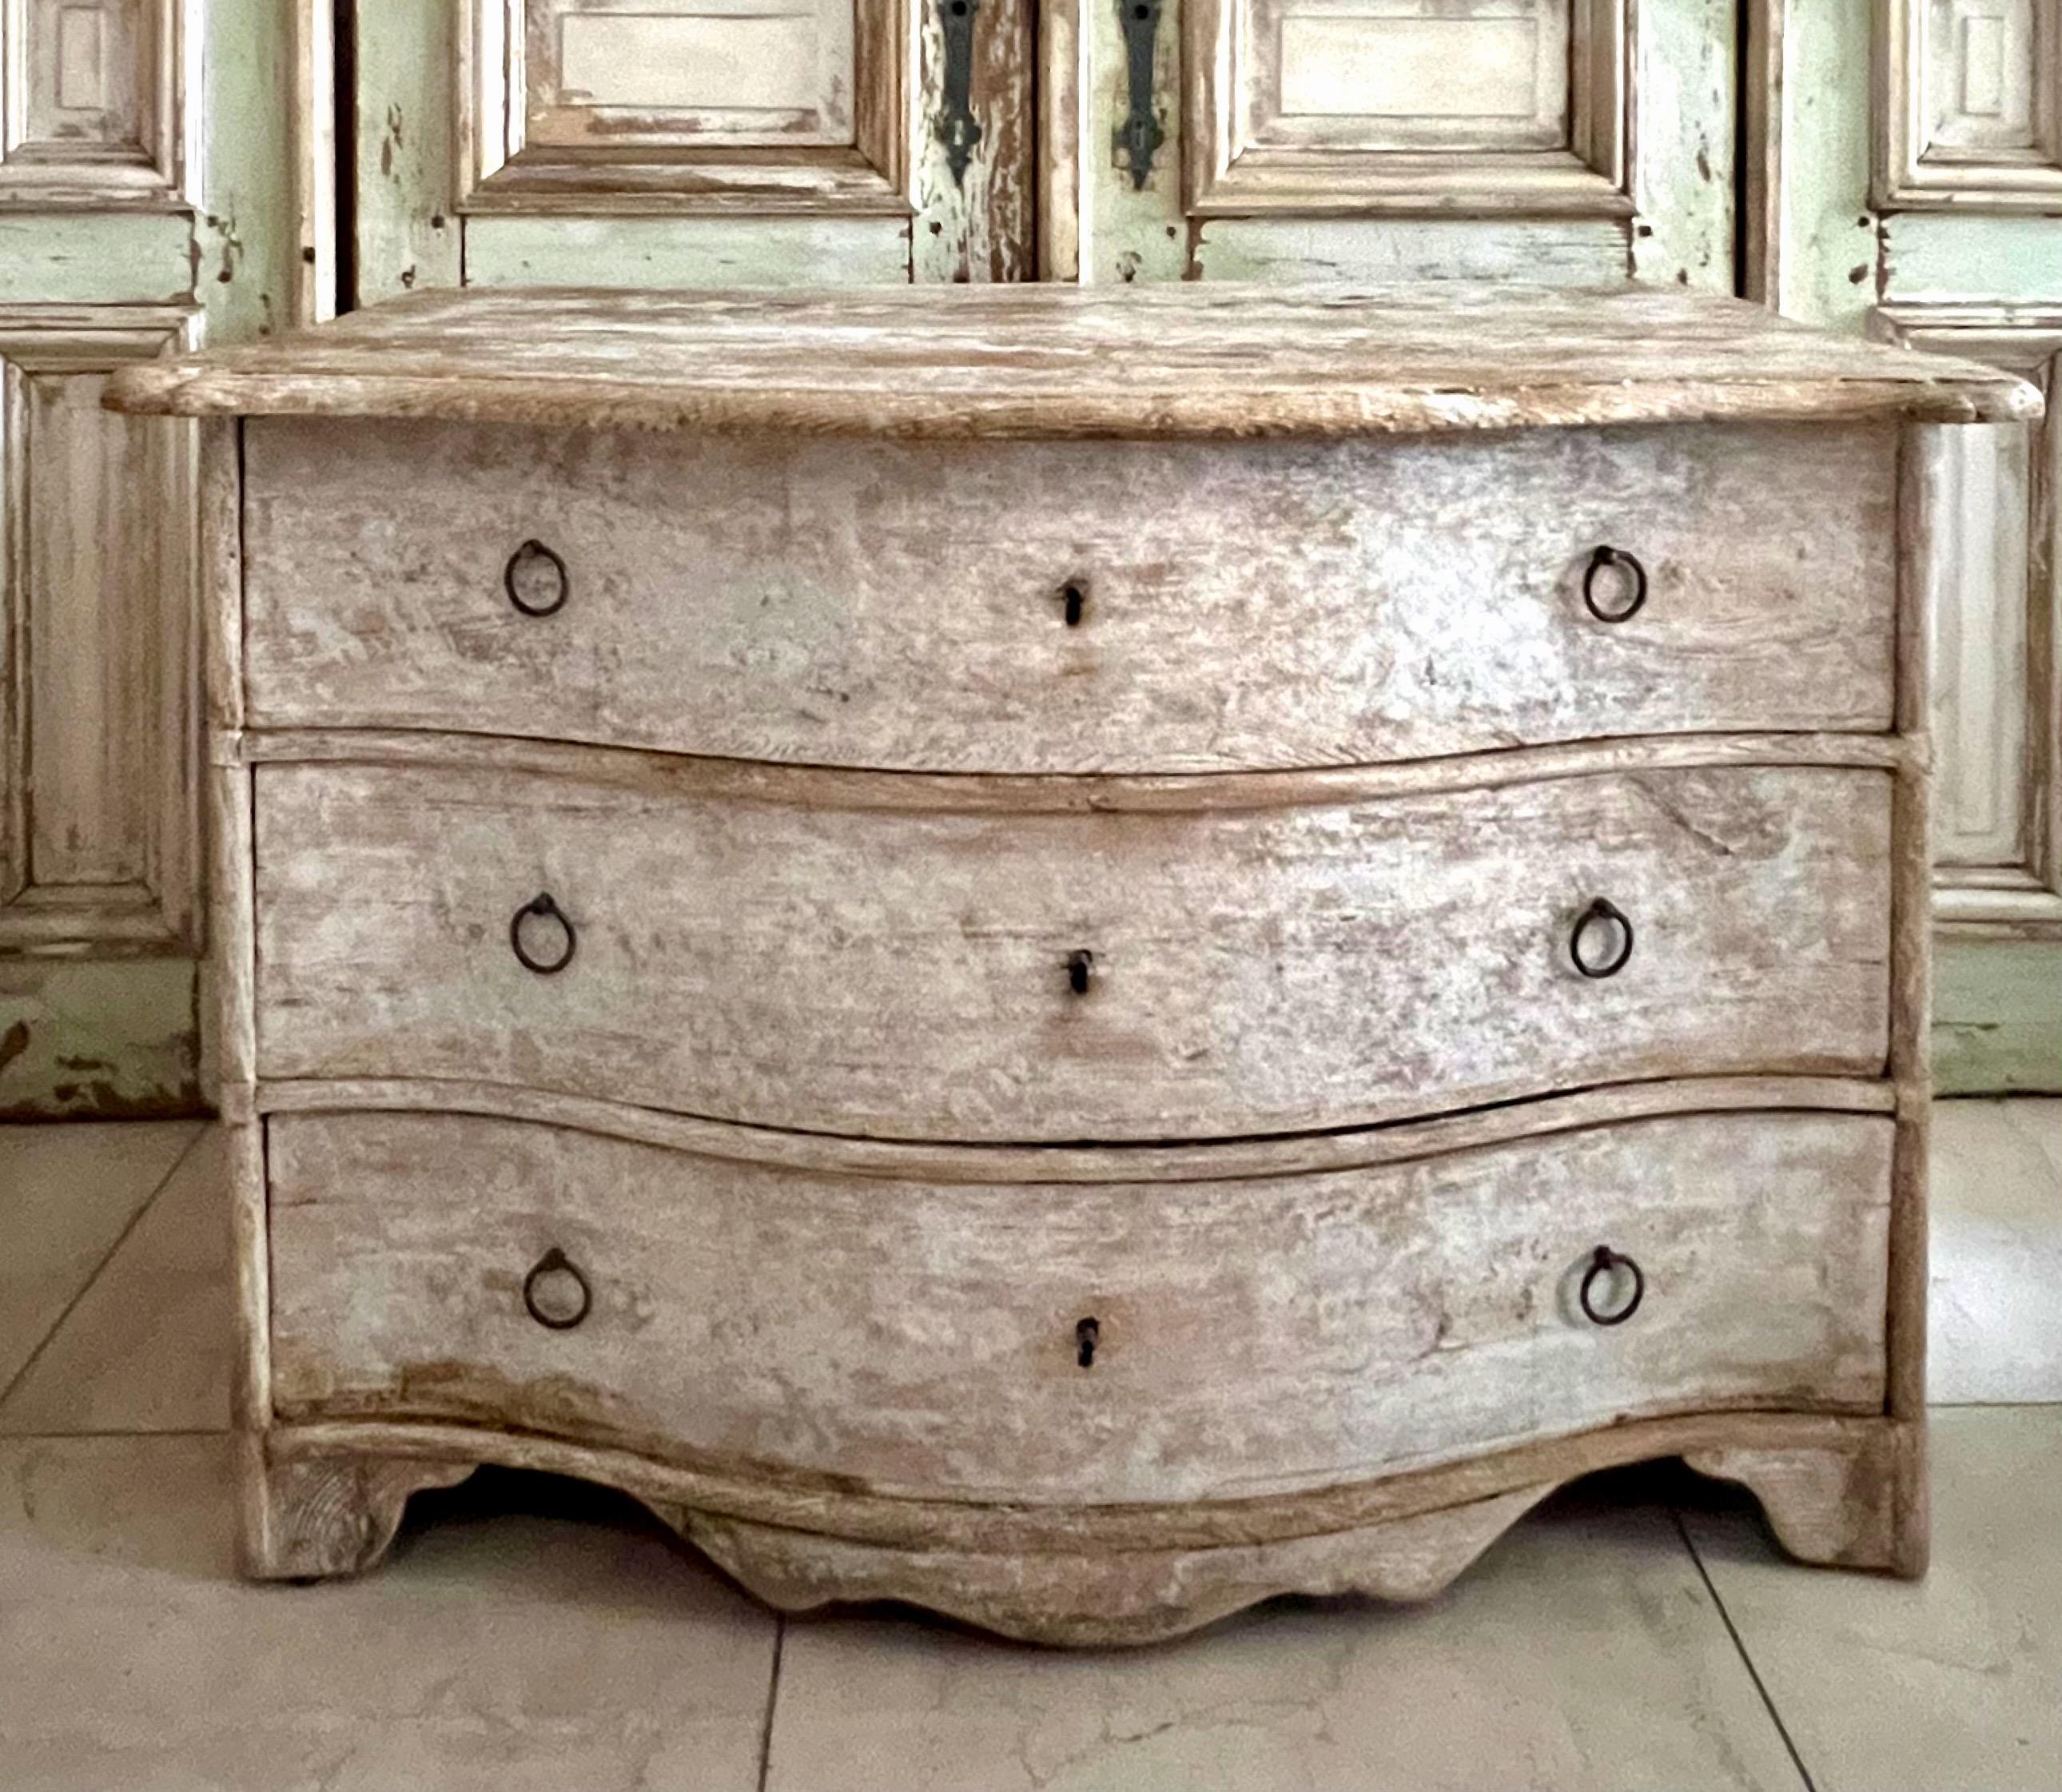 18th century chest of drawers from late Baroque period in richly carved curvaceous serpentine drawer fronts, shaped top and bracket feet in super worn patina.
Alsace, France.